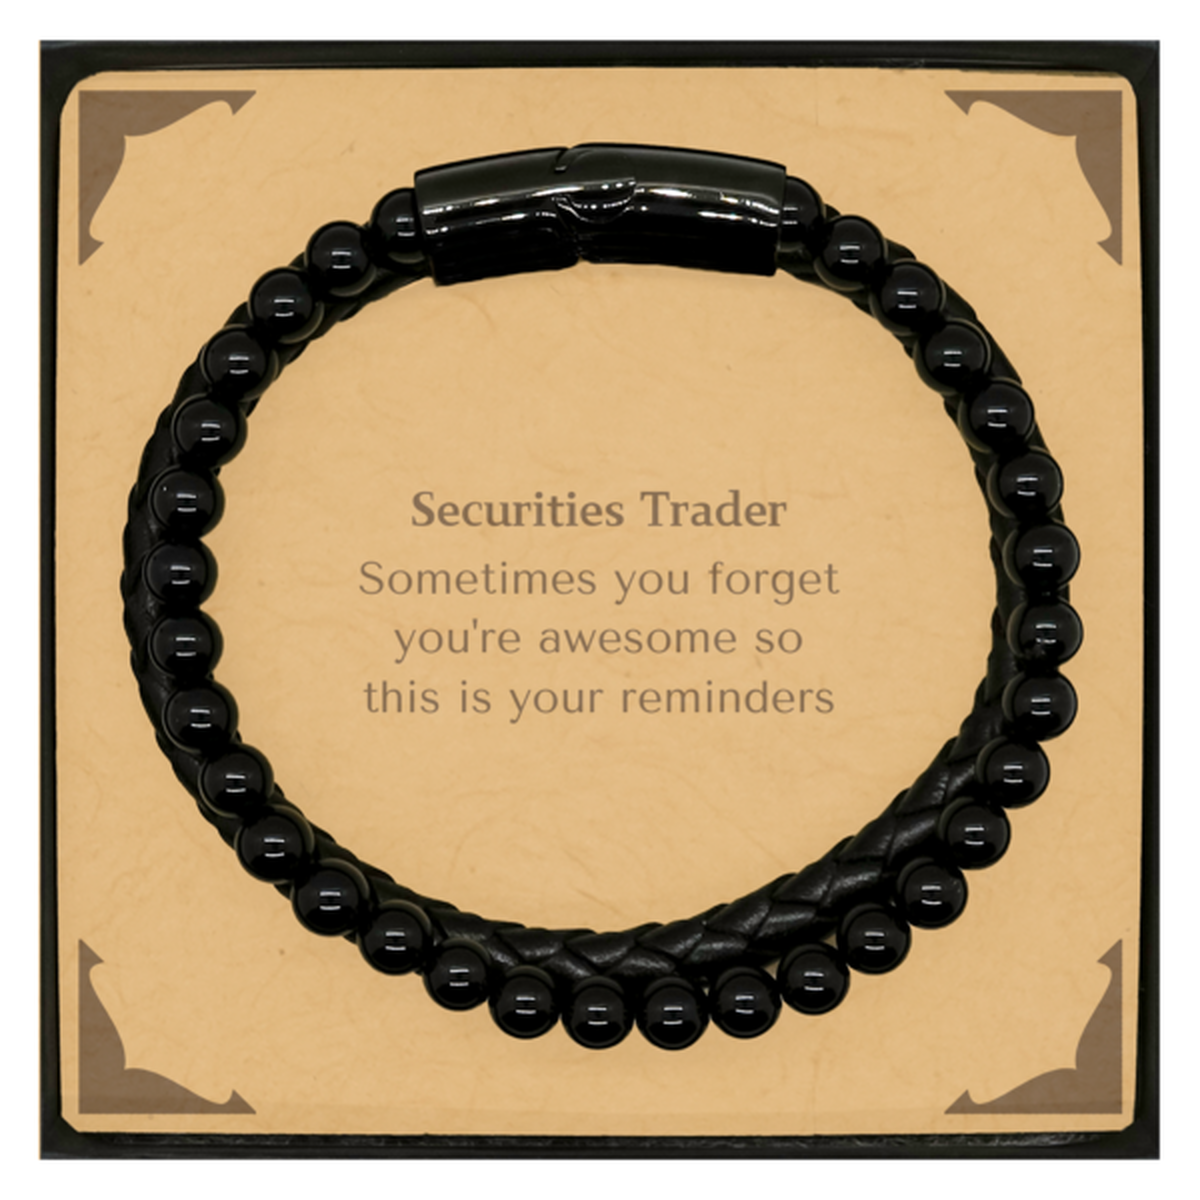 Sentimental Securities Trader Stone Leather Bracelets, Securities Trader Sometimes you forget you're awesome so this is your reminders, Graduation Christmas Birthday Gifts for Securities Trader, Men, Women, Coworkers